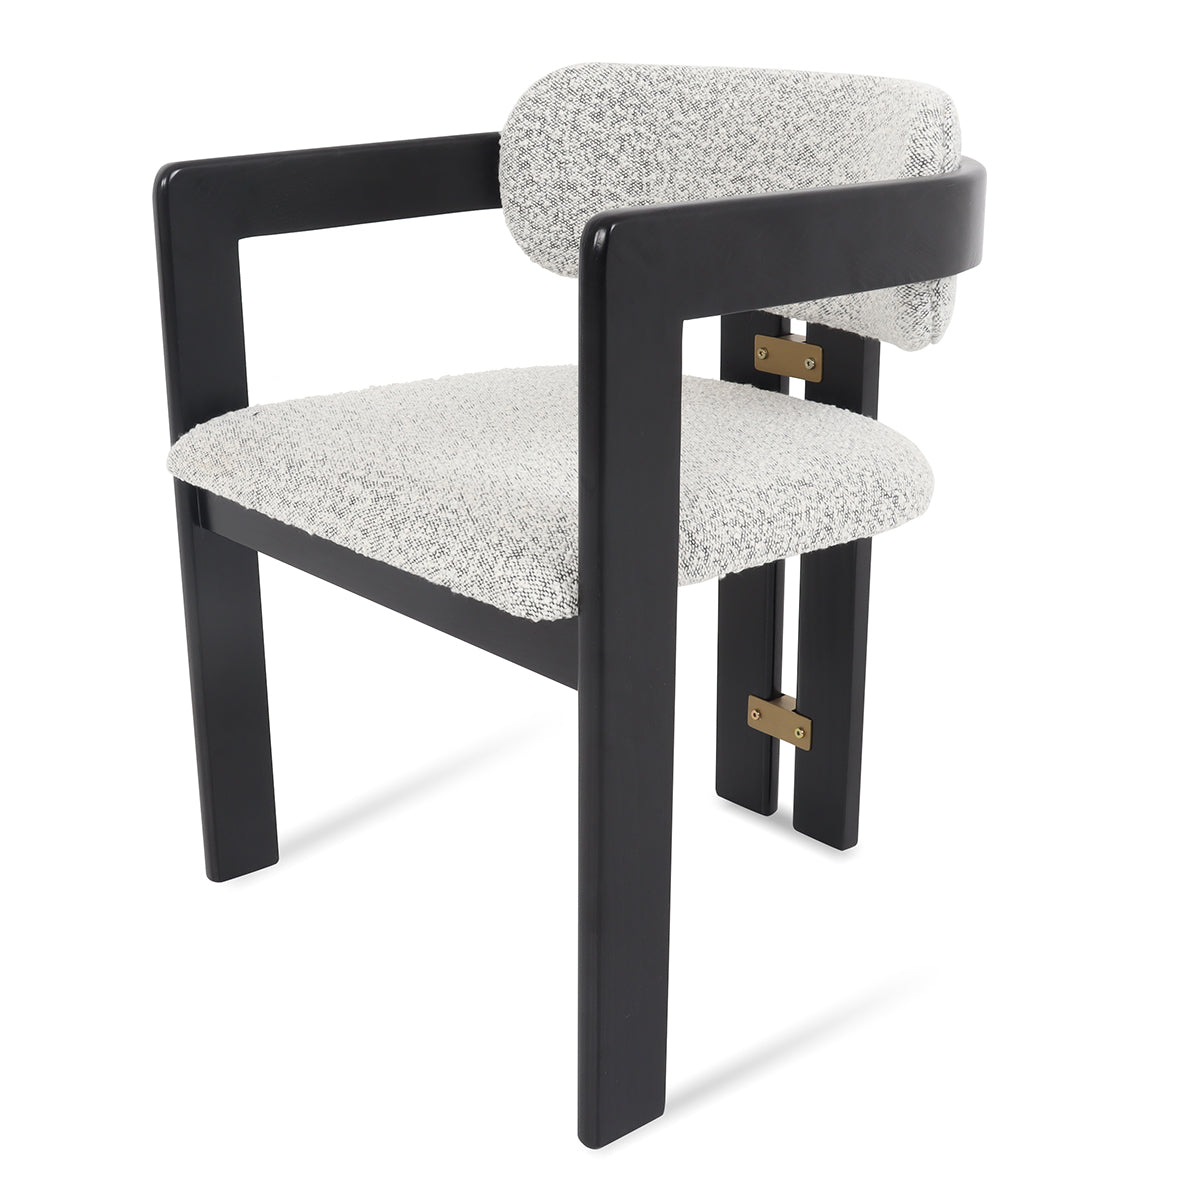 St. Germain Dining Chair